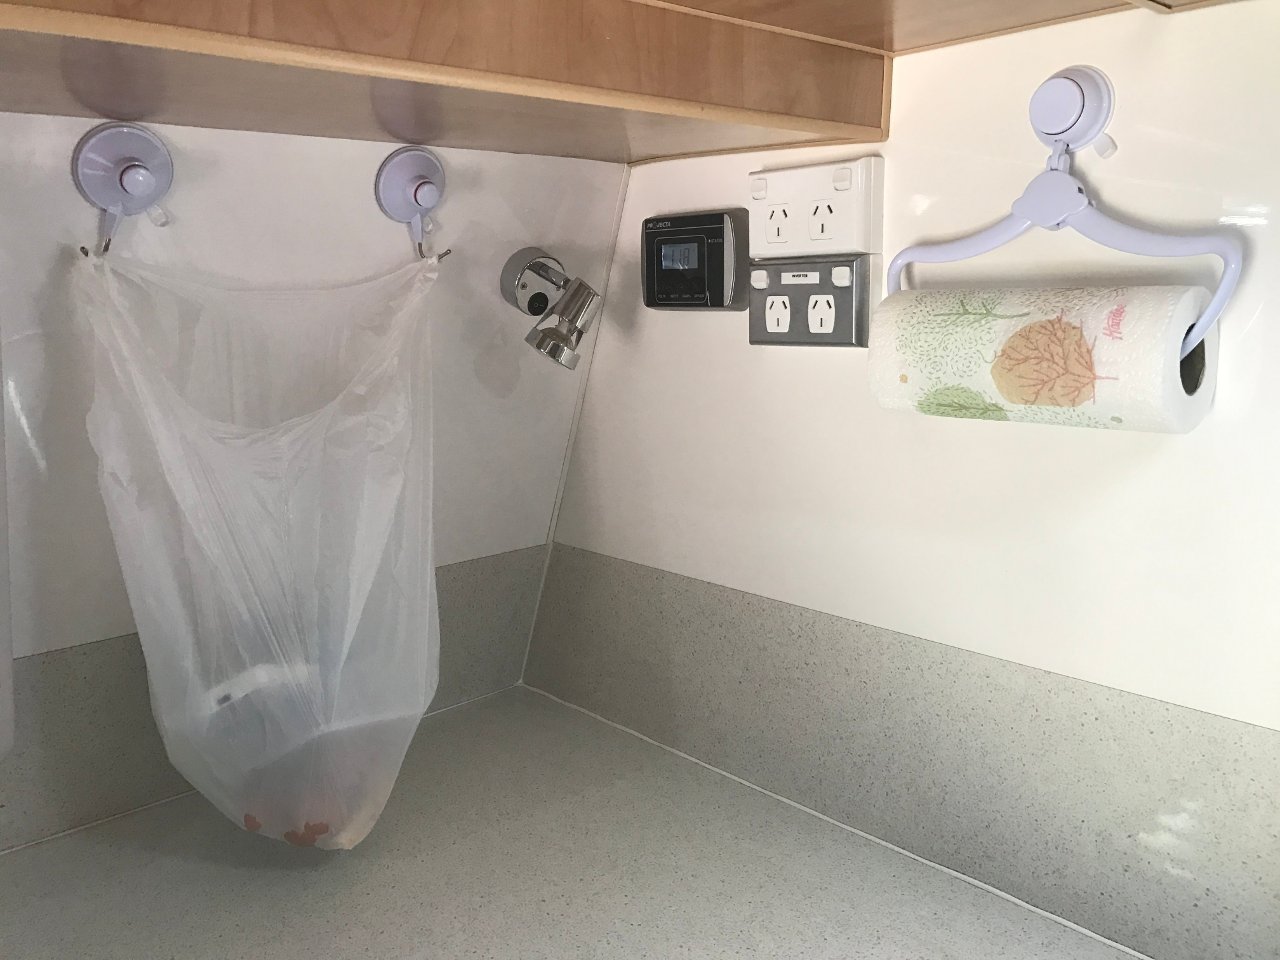 Suction hooks - bin and paper towel holder